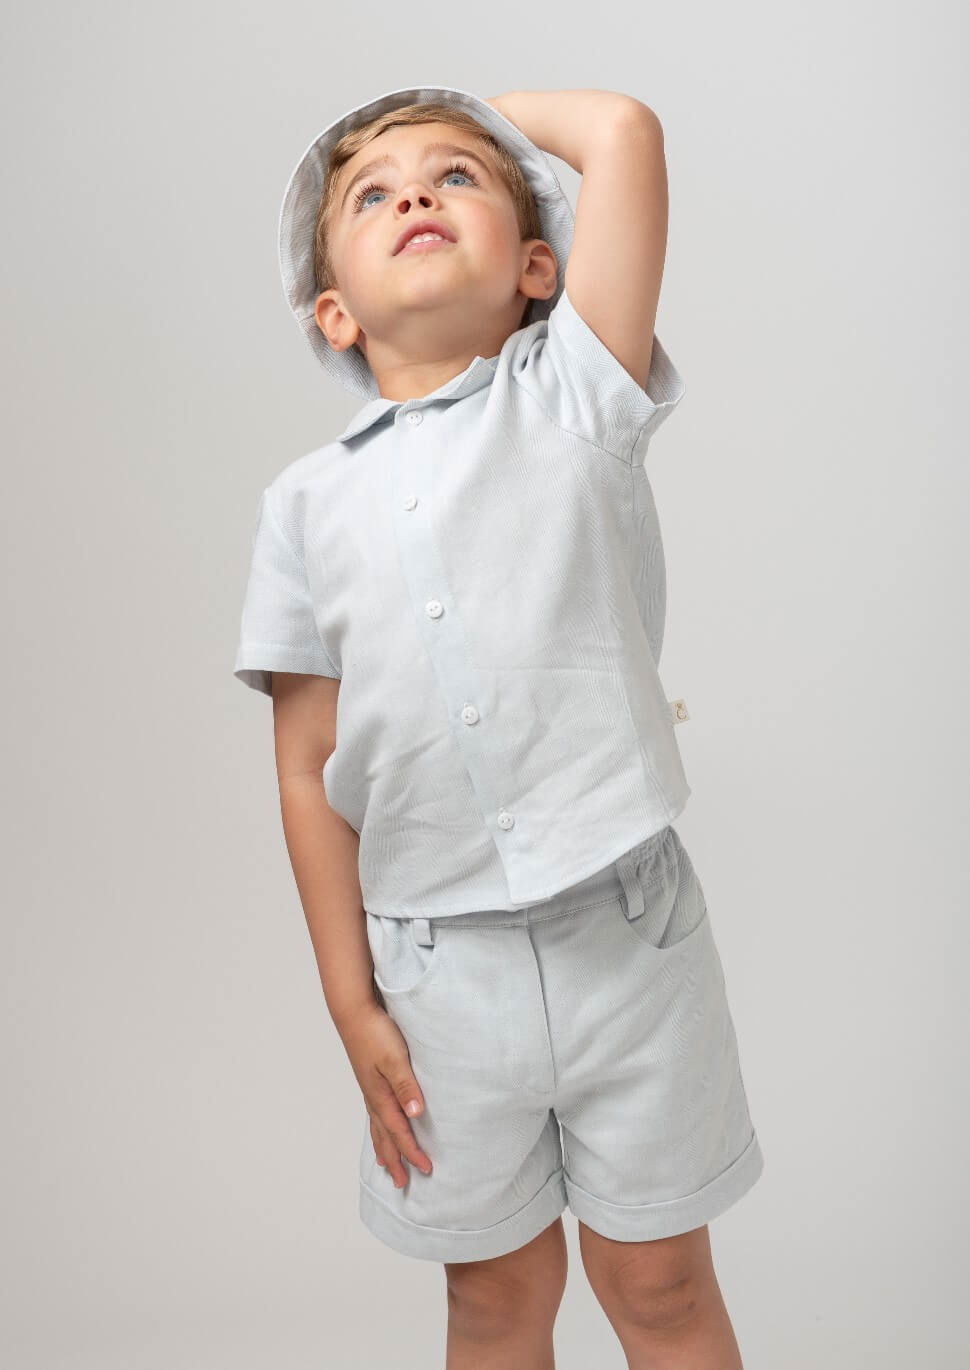 Sky Linen Shirt & Shorts Set With Hat by caramelo kids